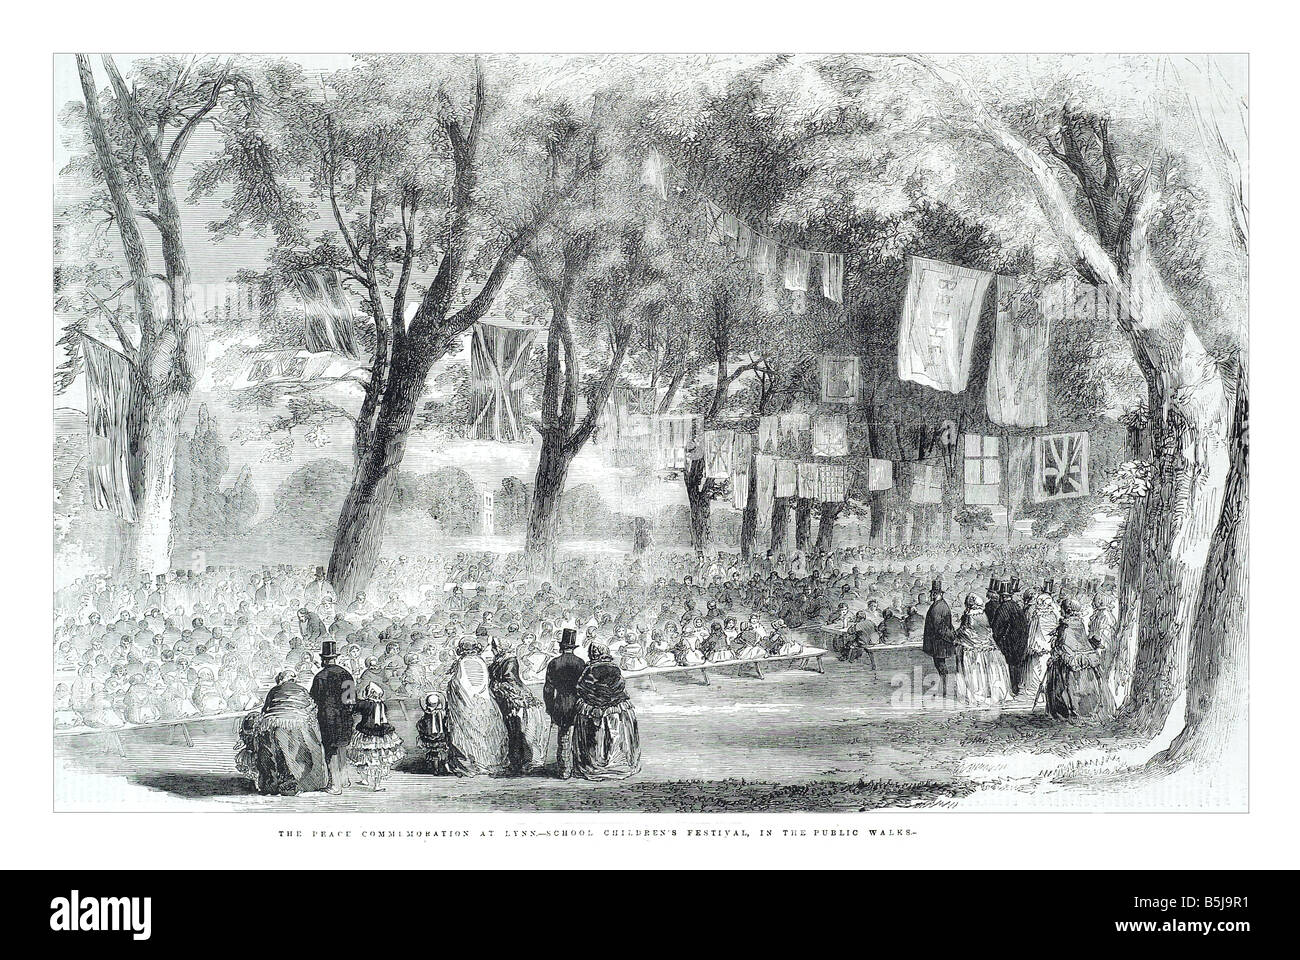 The peace commemoration at lynn school children s festival in the public walks June 7 1856 The Illustrated London News Page 637 Stock Photo